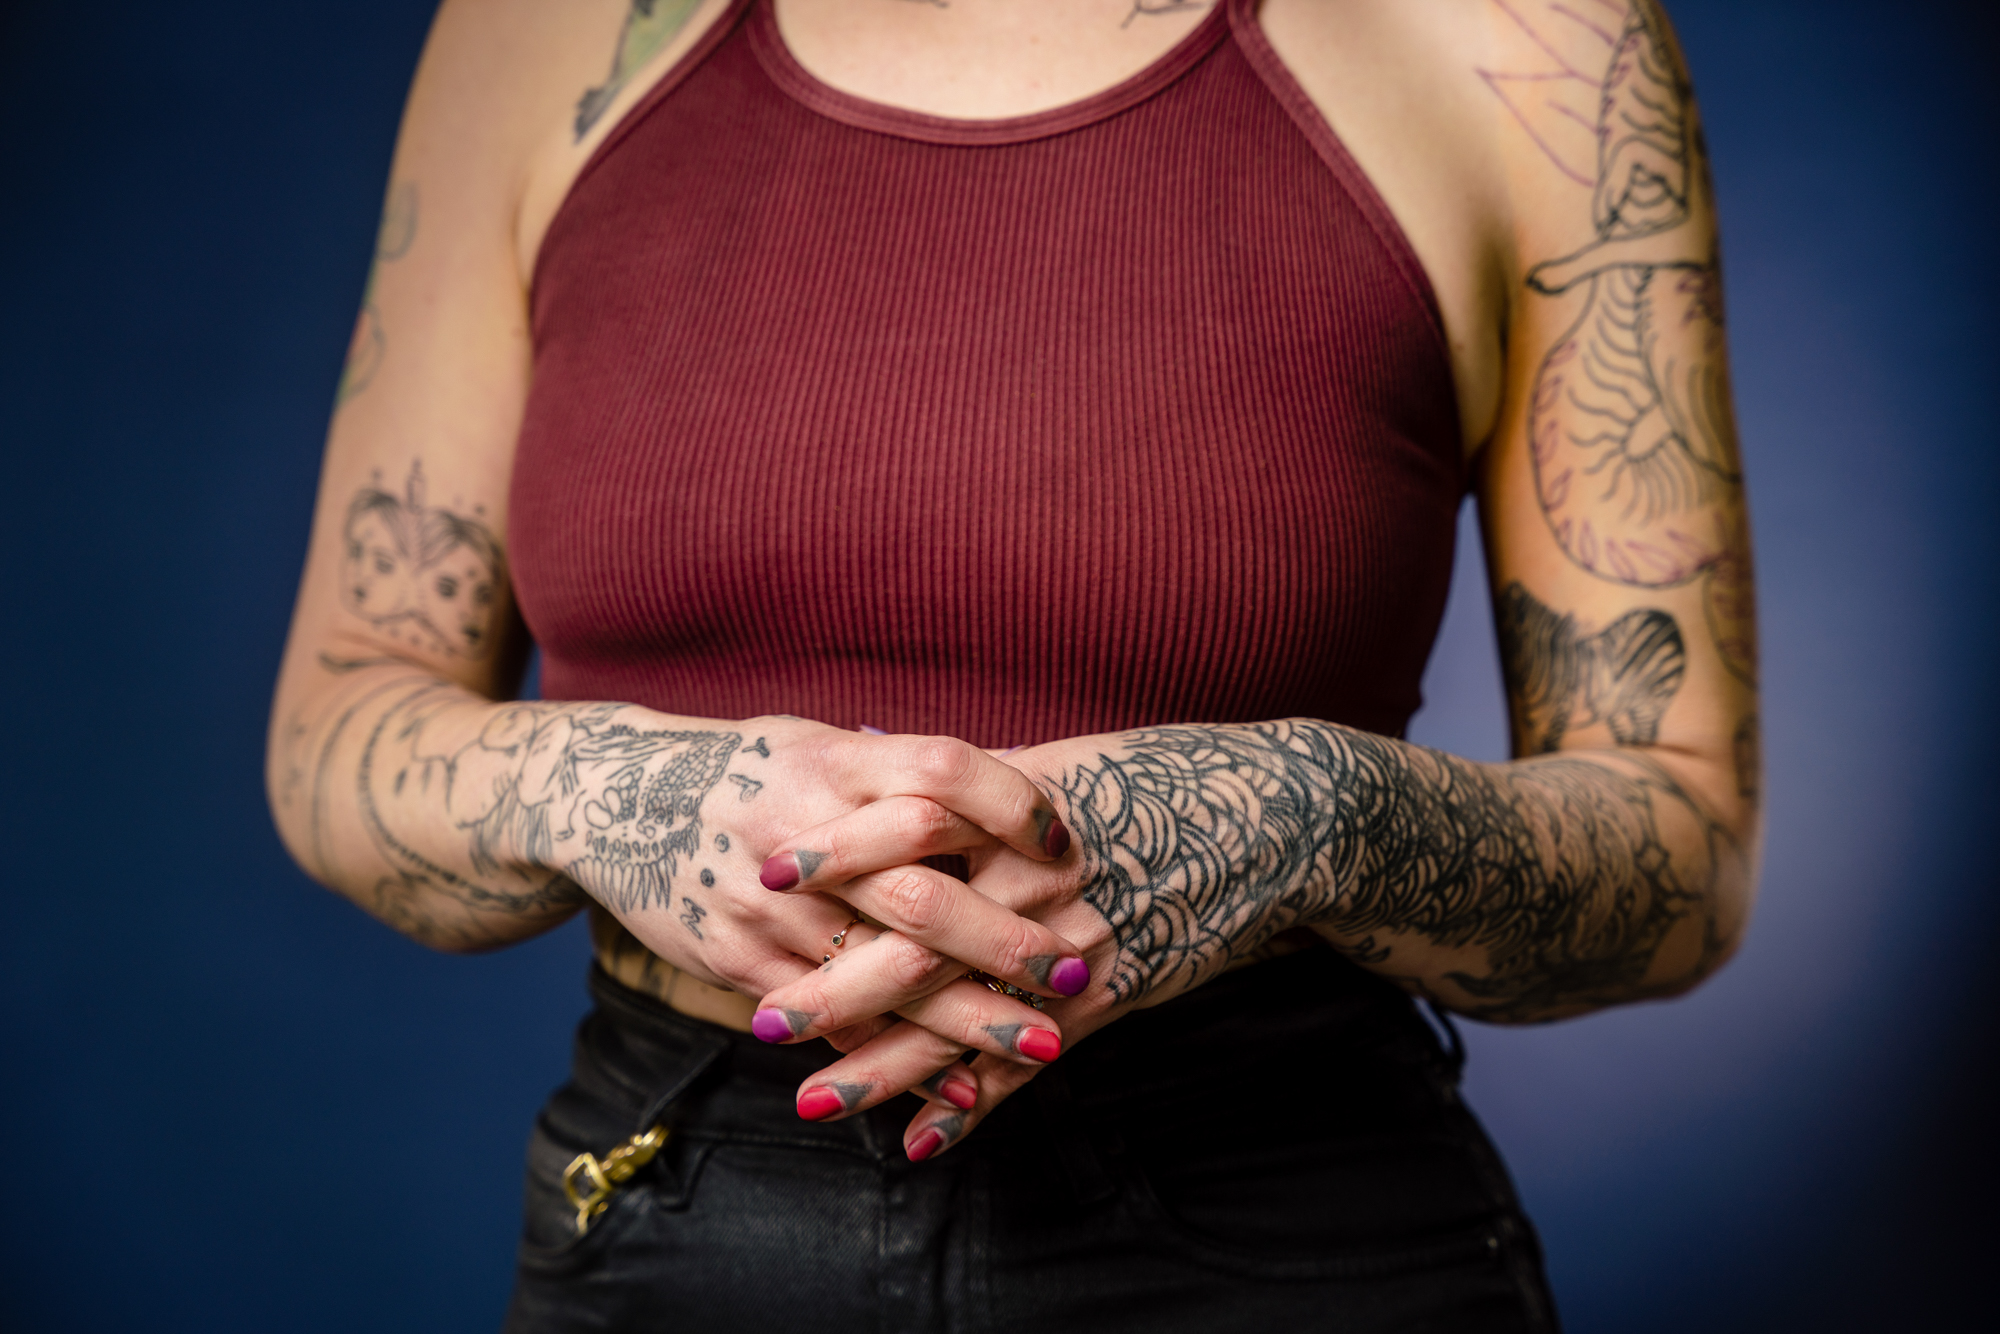 Microneedle tattoo technique could make tattooing painless and fast |  Tattoos | The Guardian